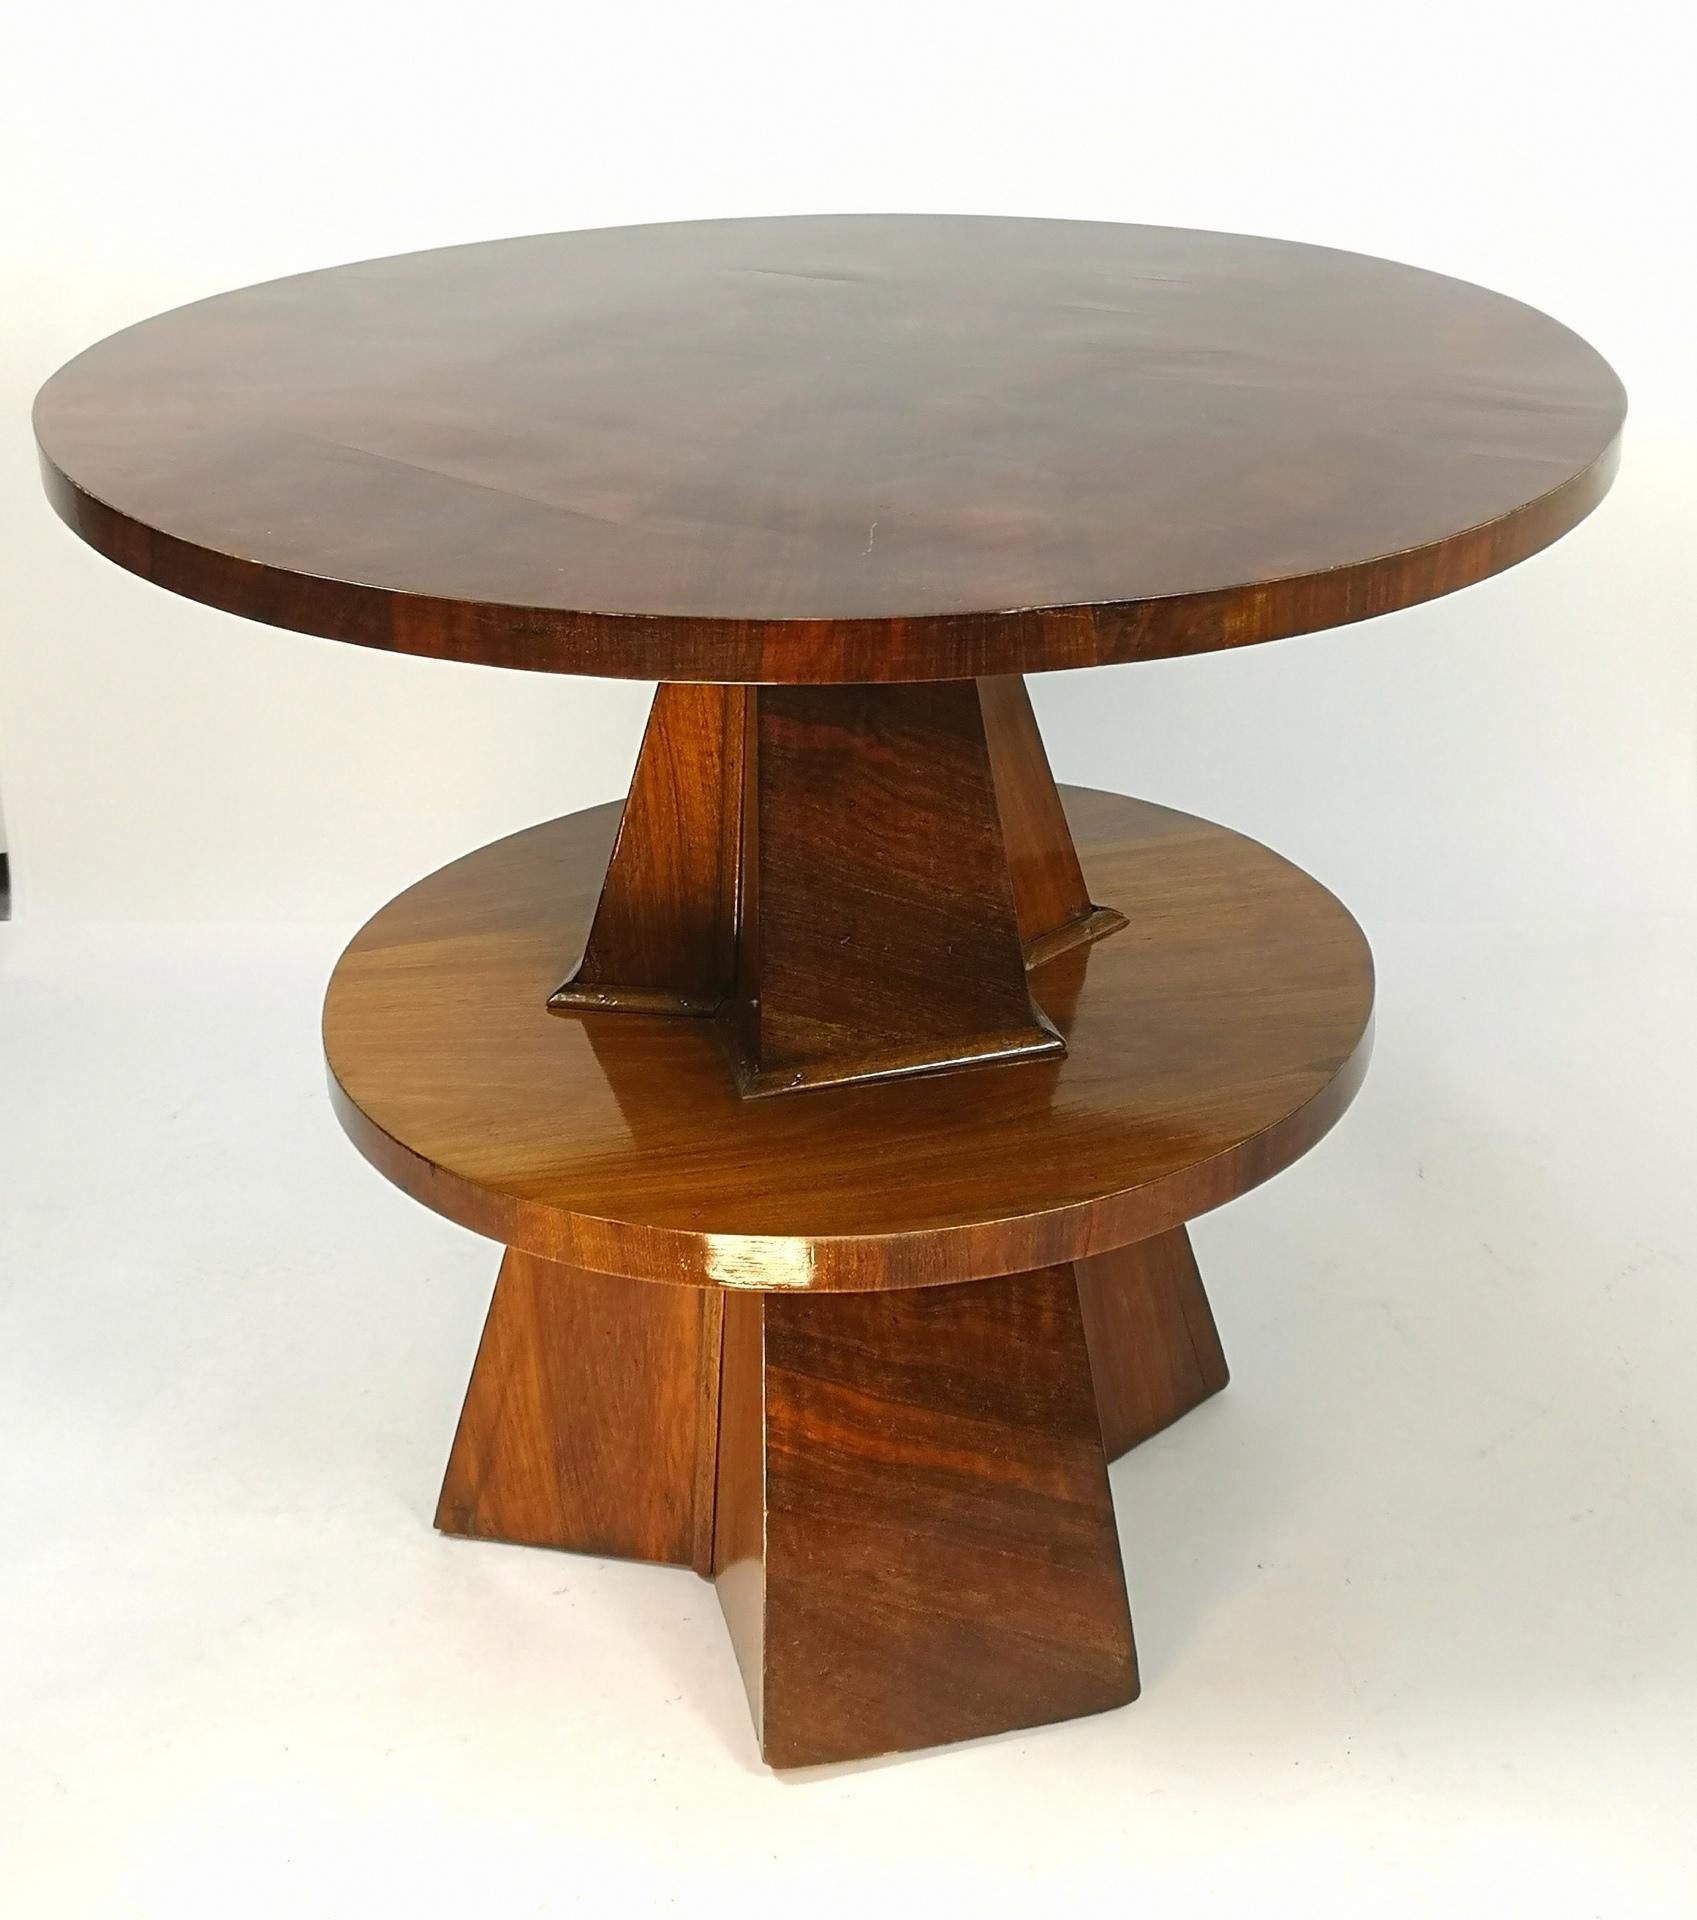 Art Deco saloon table with walnut veneer and French lacquer polish, 1930's.
  